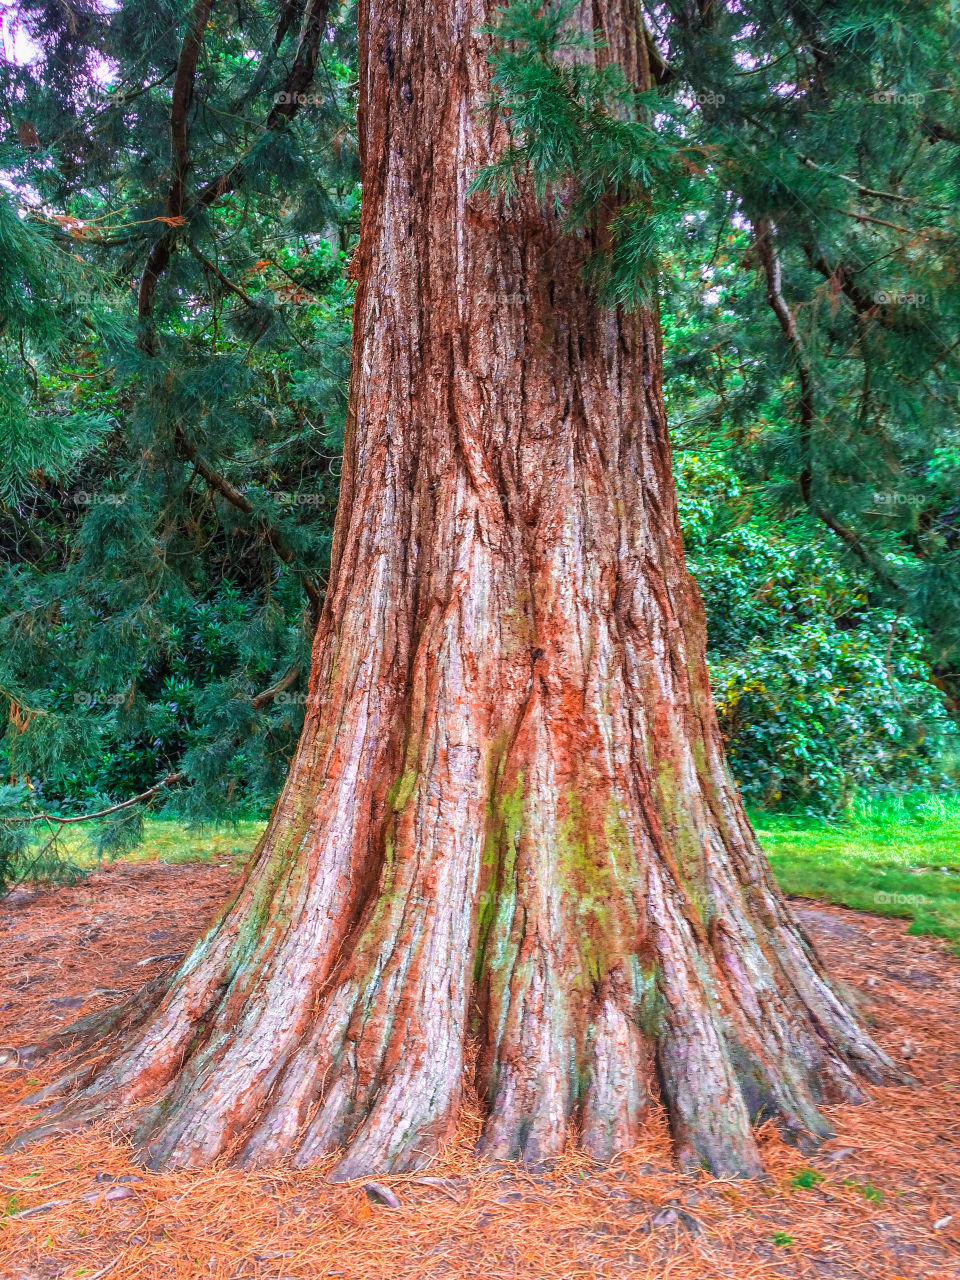 The reddish trunk of a redwood pine tree, with green foliage.